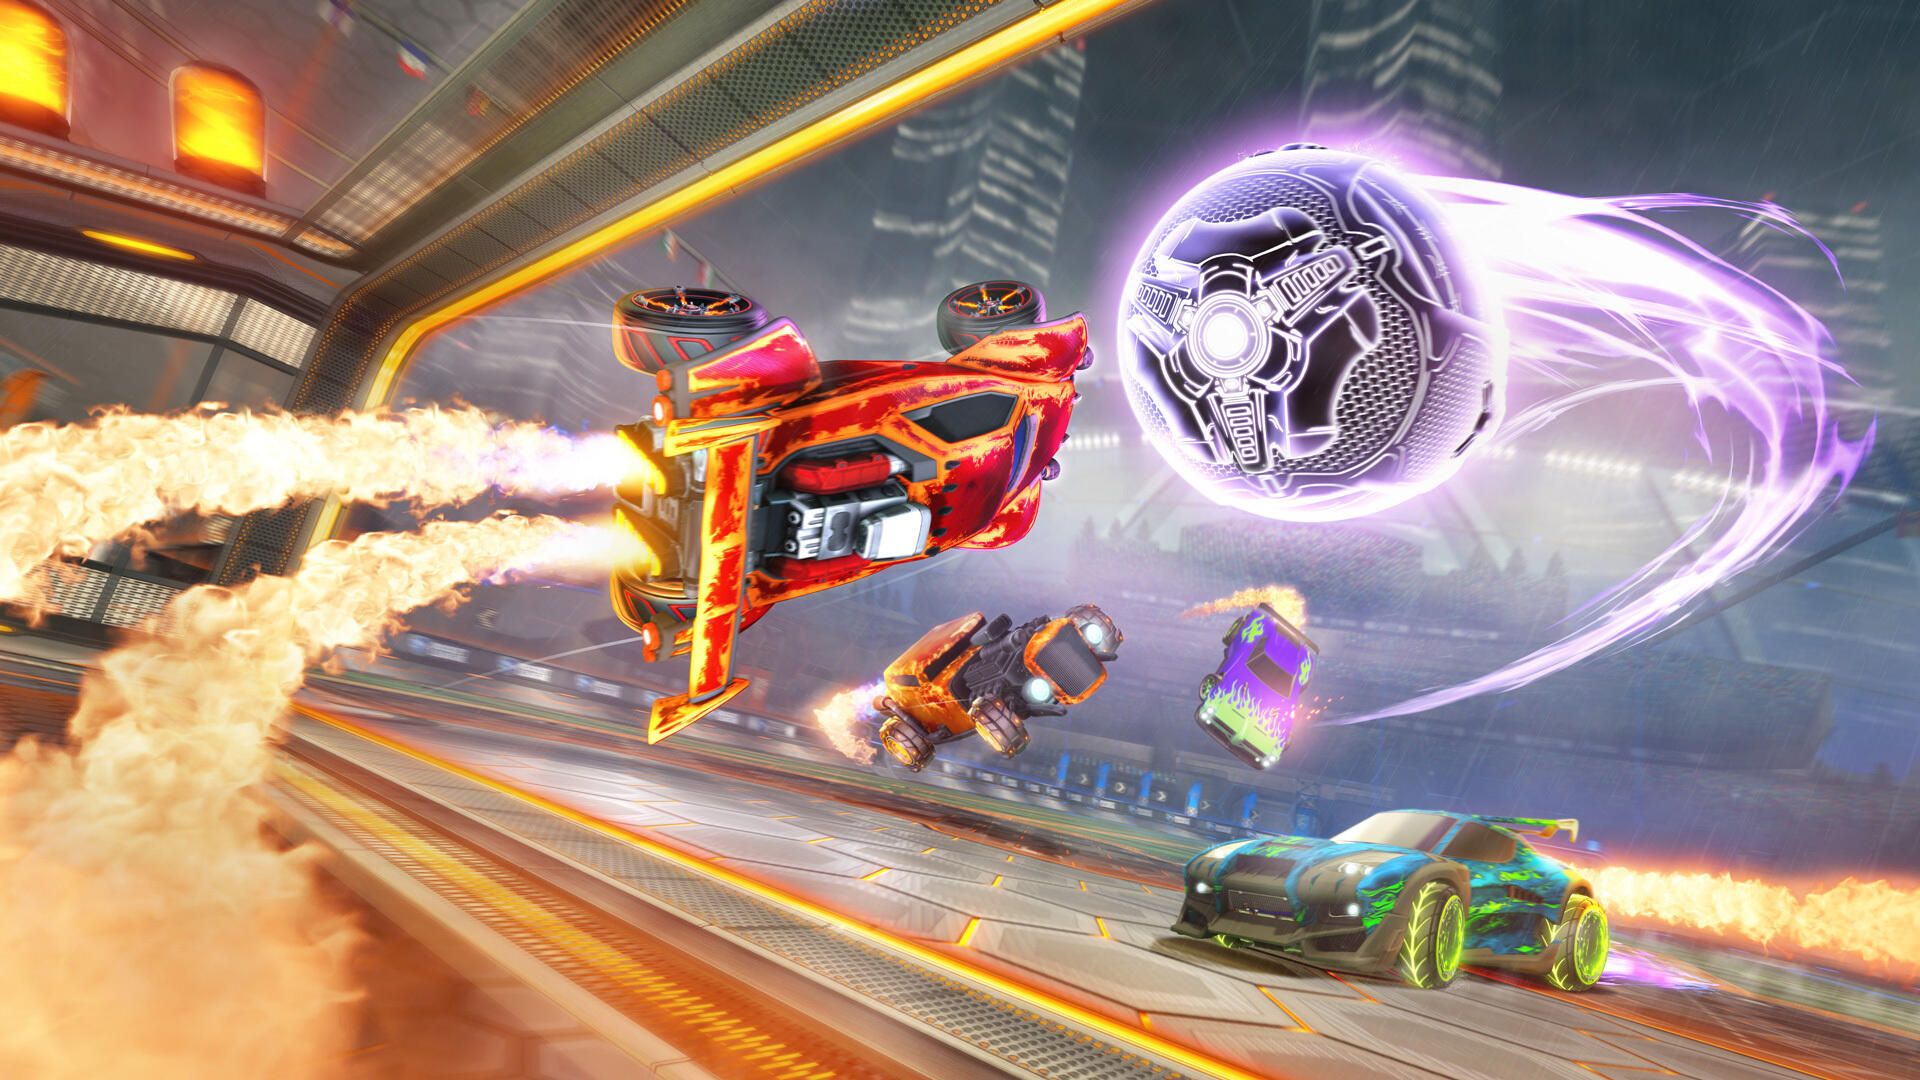 Rocket League Modes of May, How to Enable 2FA on Rocket League